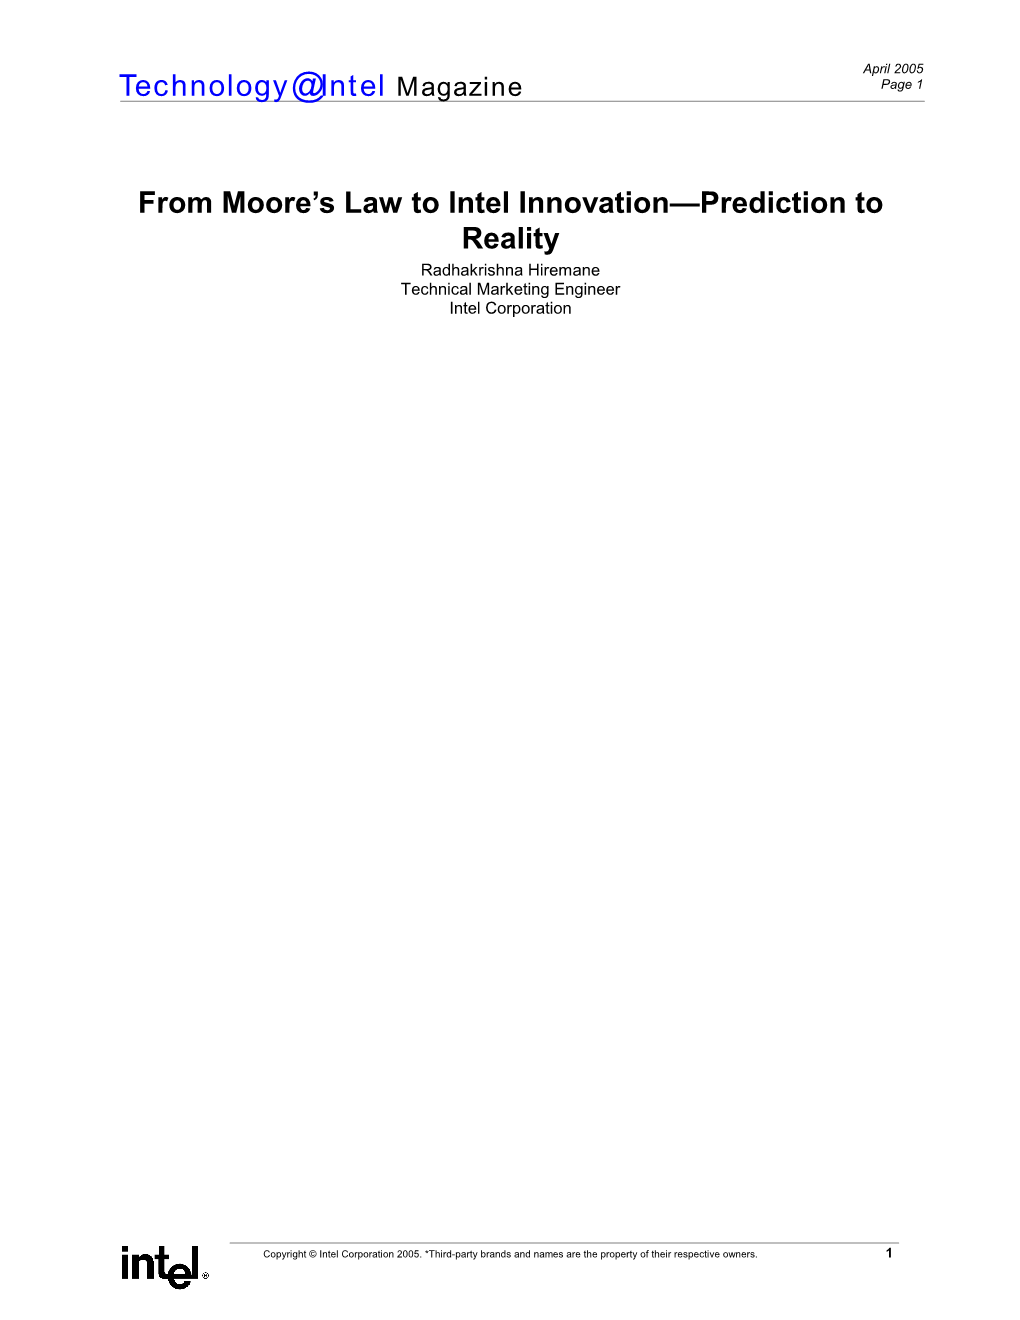 From Moore's Law to Intel Innovation—Prediction to Reality